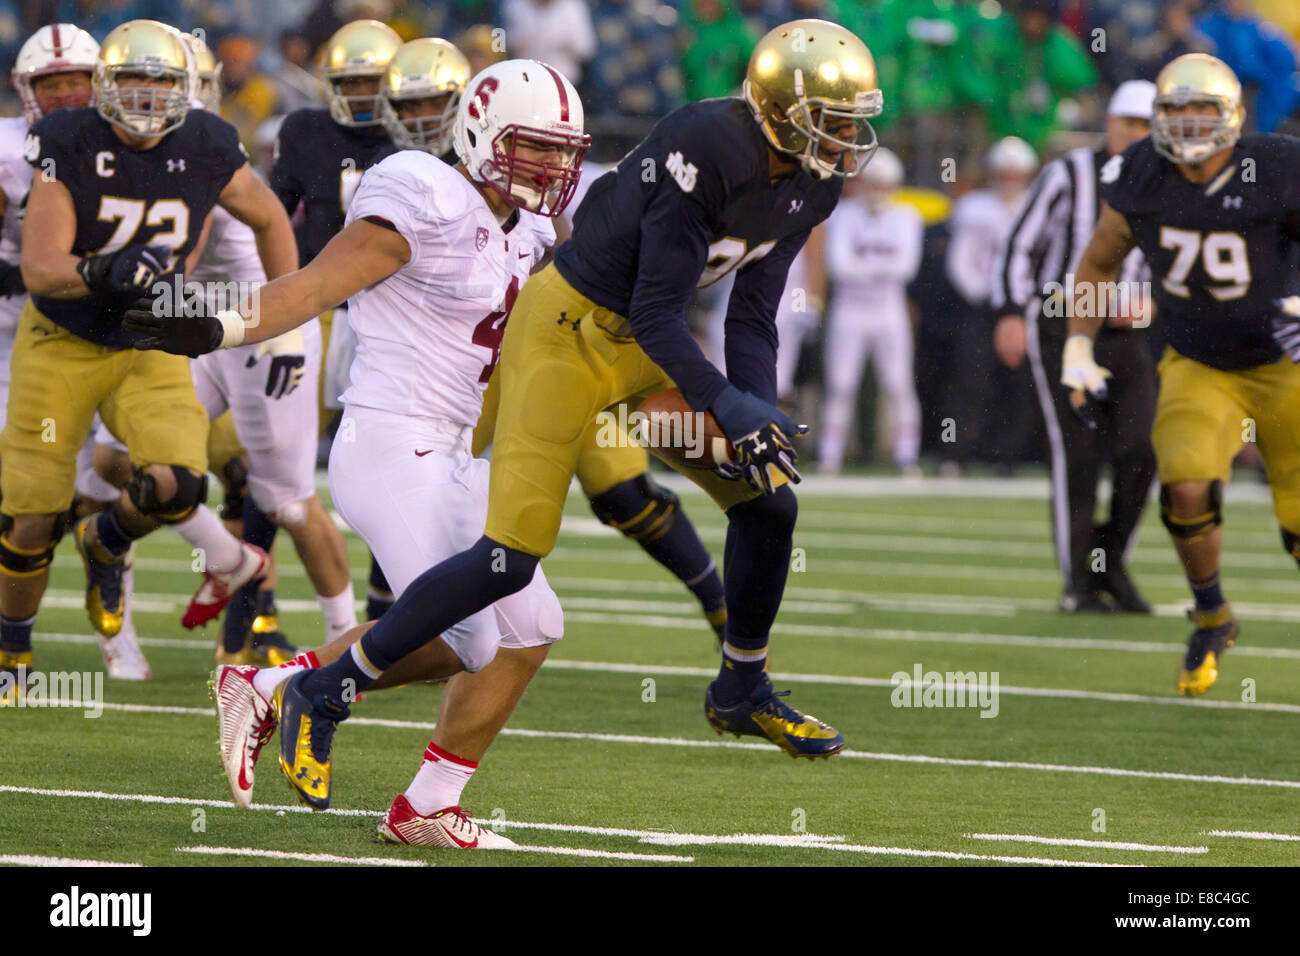 South Bend, Indiana, USA. 4th Oct, 2014. Notre Dame WR COREY ROBINSON (88) makes a juggling catch against Stanford ILB BLAKE MARTINEZ (4) during the fourth quarter. The Notre Dame Fighting Irish beat the Stanford Cardinal 17-14 at Notre Dame Stadium in South Bend, Indiana. Credit:  Frank Jansky/ZUMA Wire/Alamy Live News Stock Photo